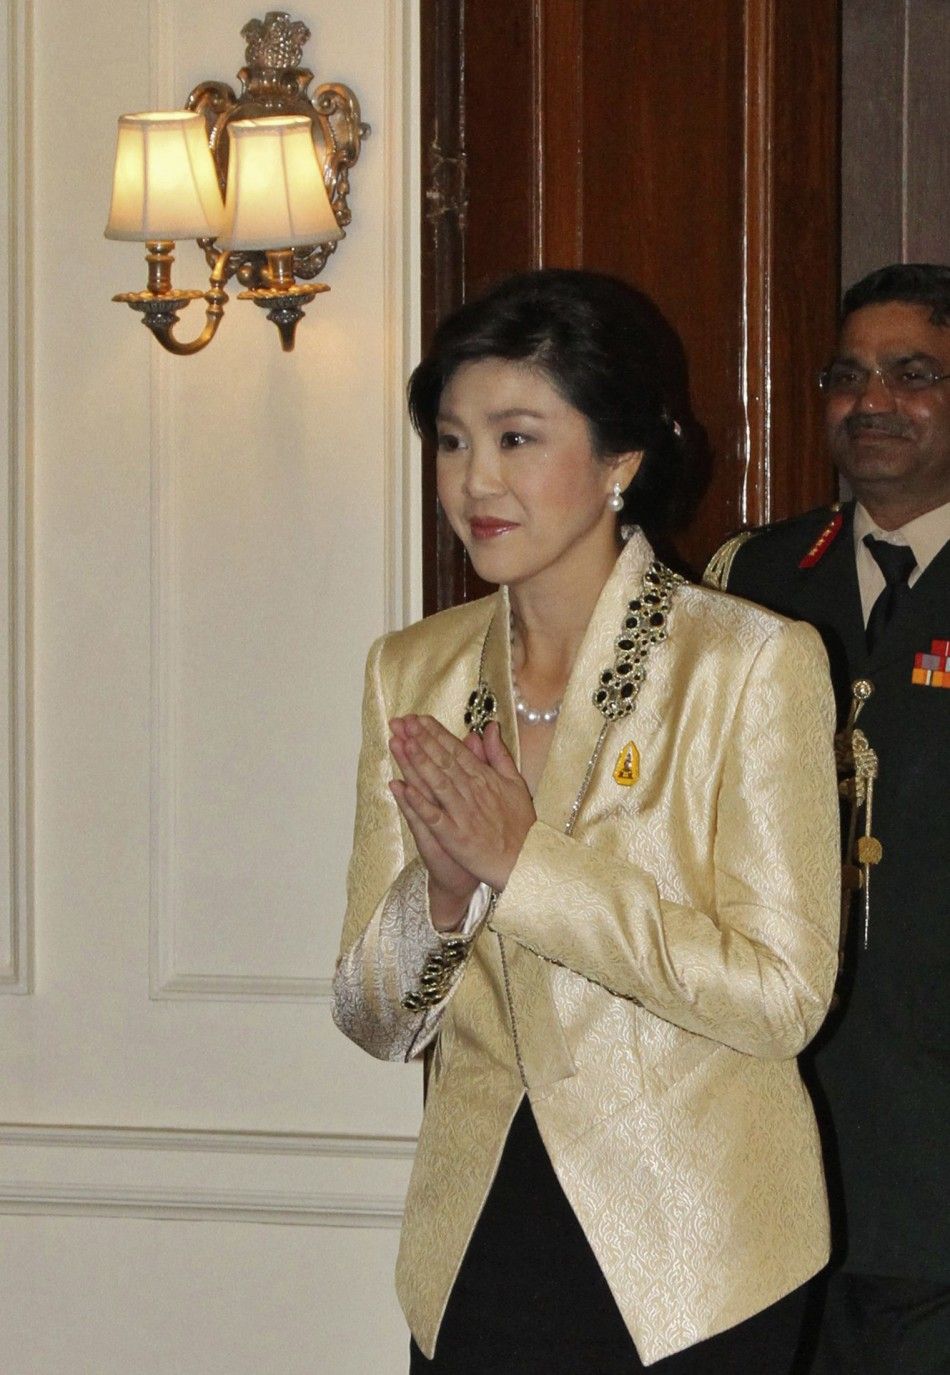 Thailand039s PM Shinawatra gestures to Indian President Patil upon her arrival for their meeting in New Delhi